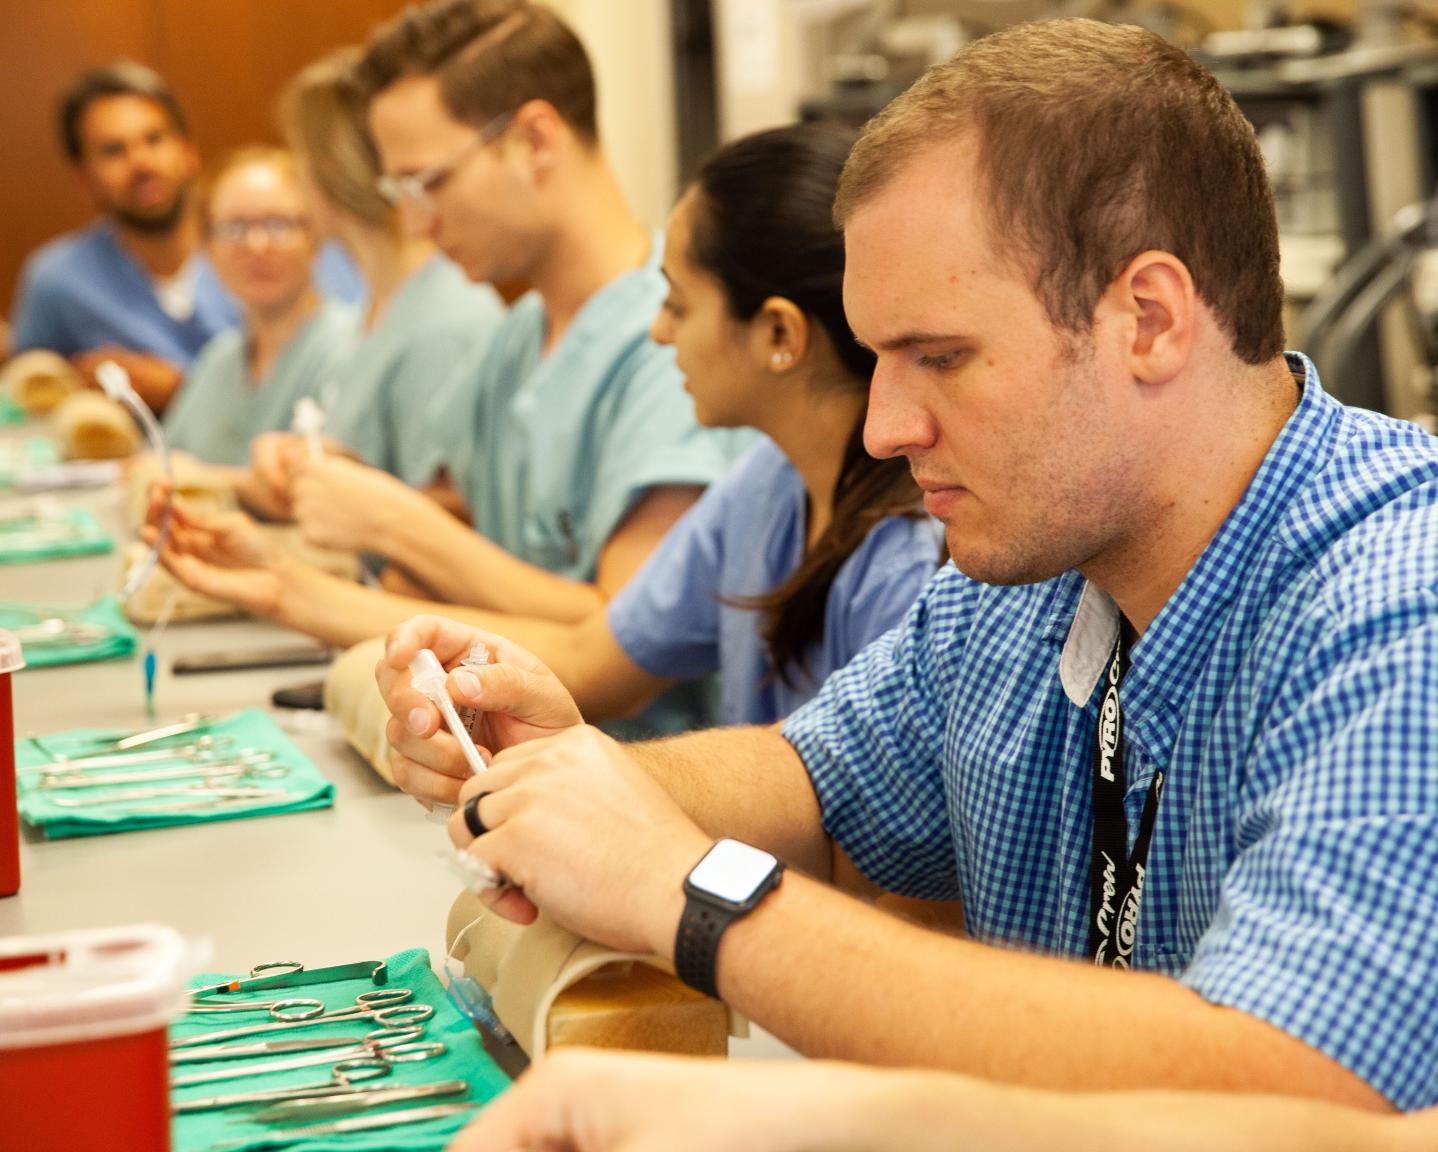 Students sitting at a table with surgical tools